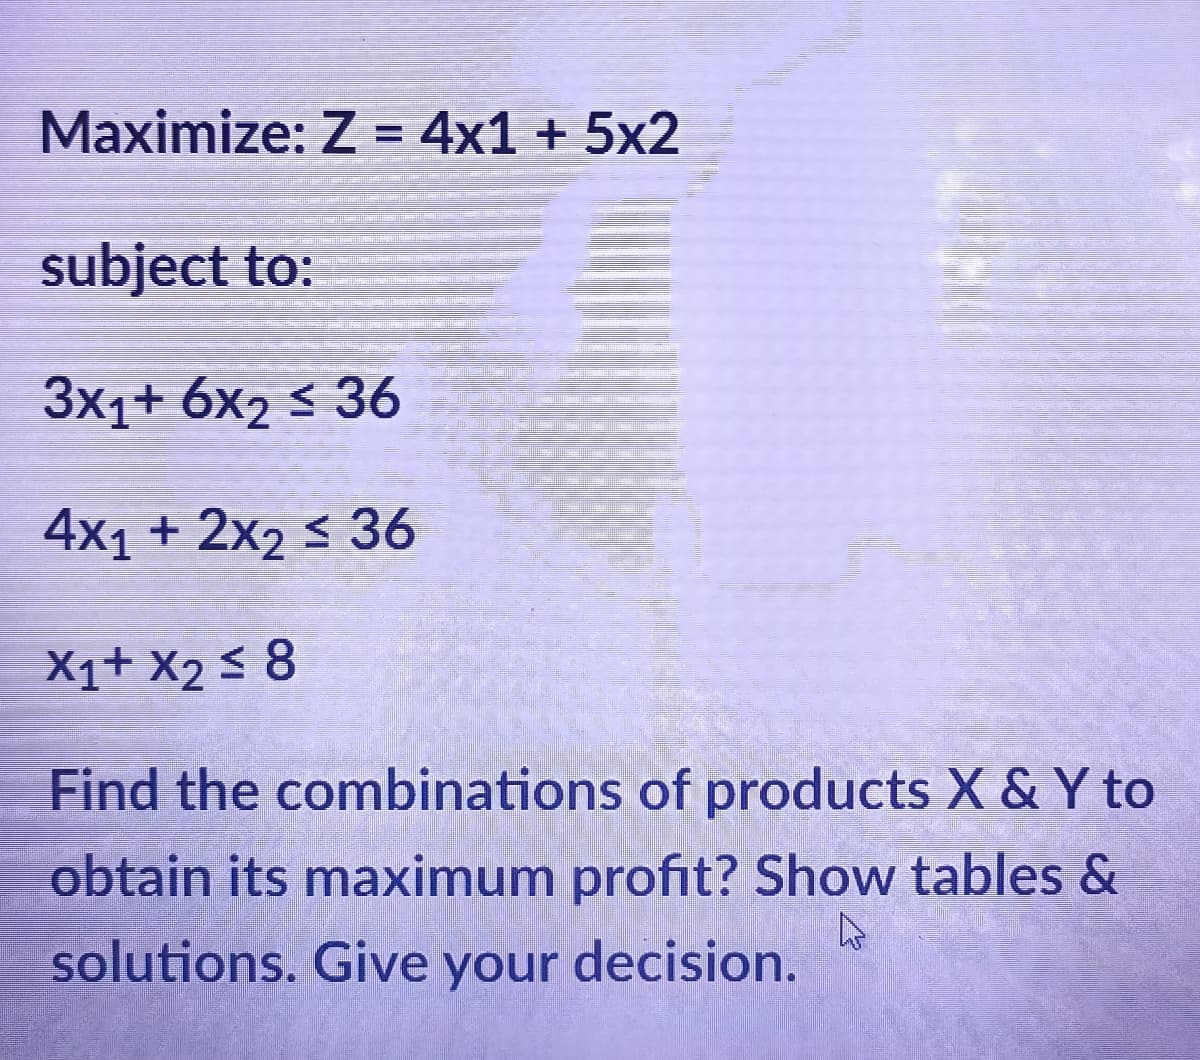 Maximize: Z = 4x1 + 5x2
subject to:
3x1+ 6x₂ ≤ 36
4x1 + 2x2 ≤ 36
X1+ X₂ ≤ 8
Find the combinations of products X & Y to
obtain its maximum profit? Show tables &
A
solutions. Give your decision.